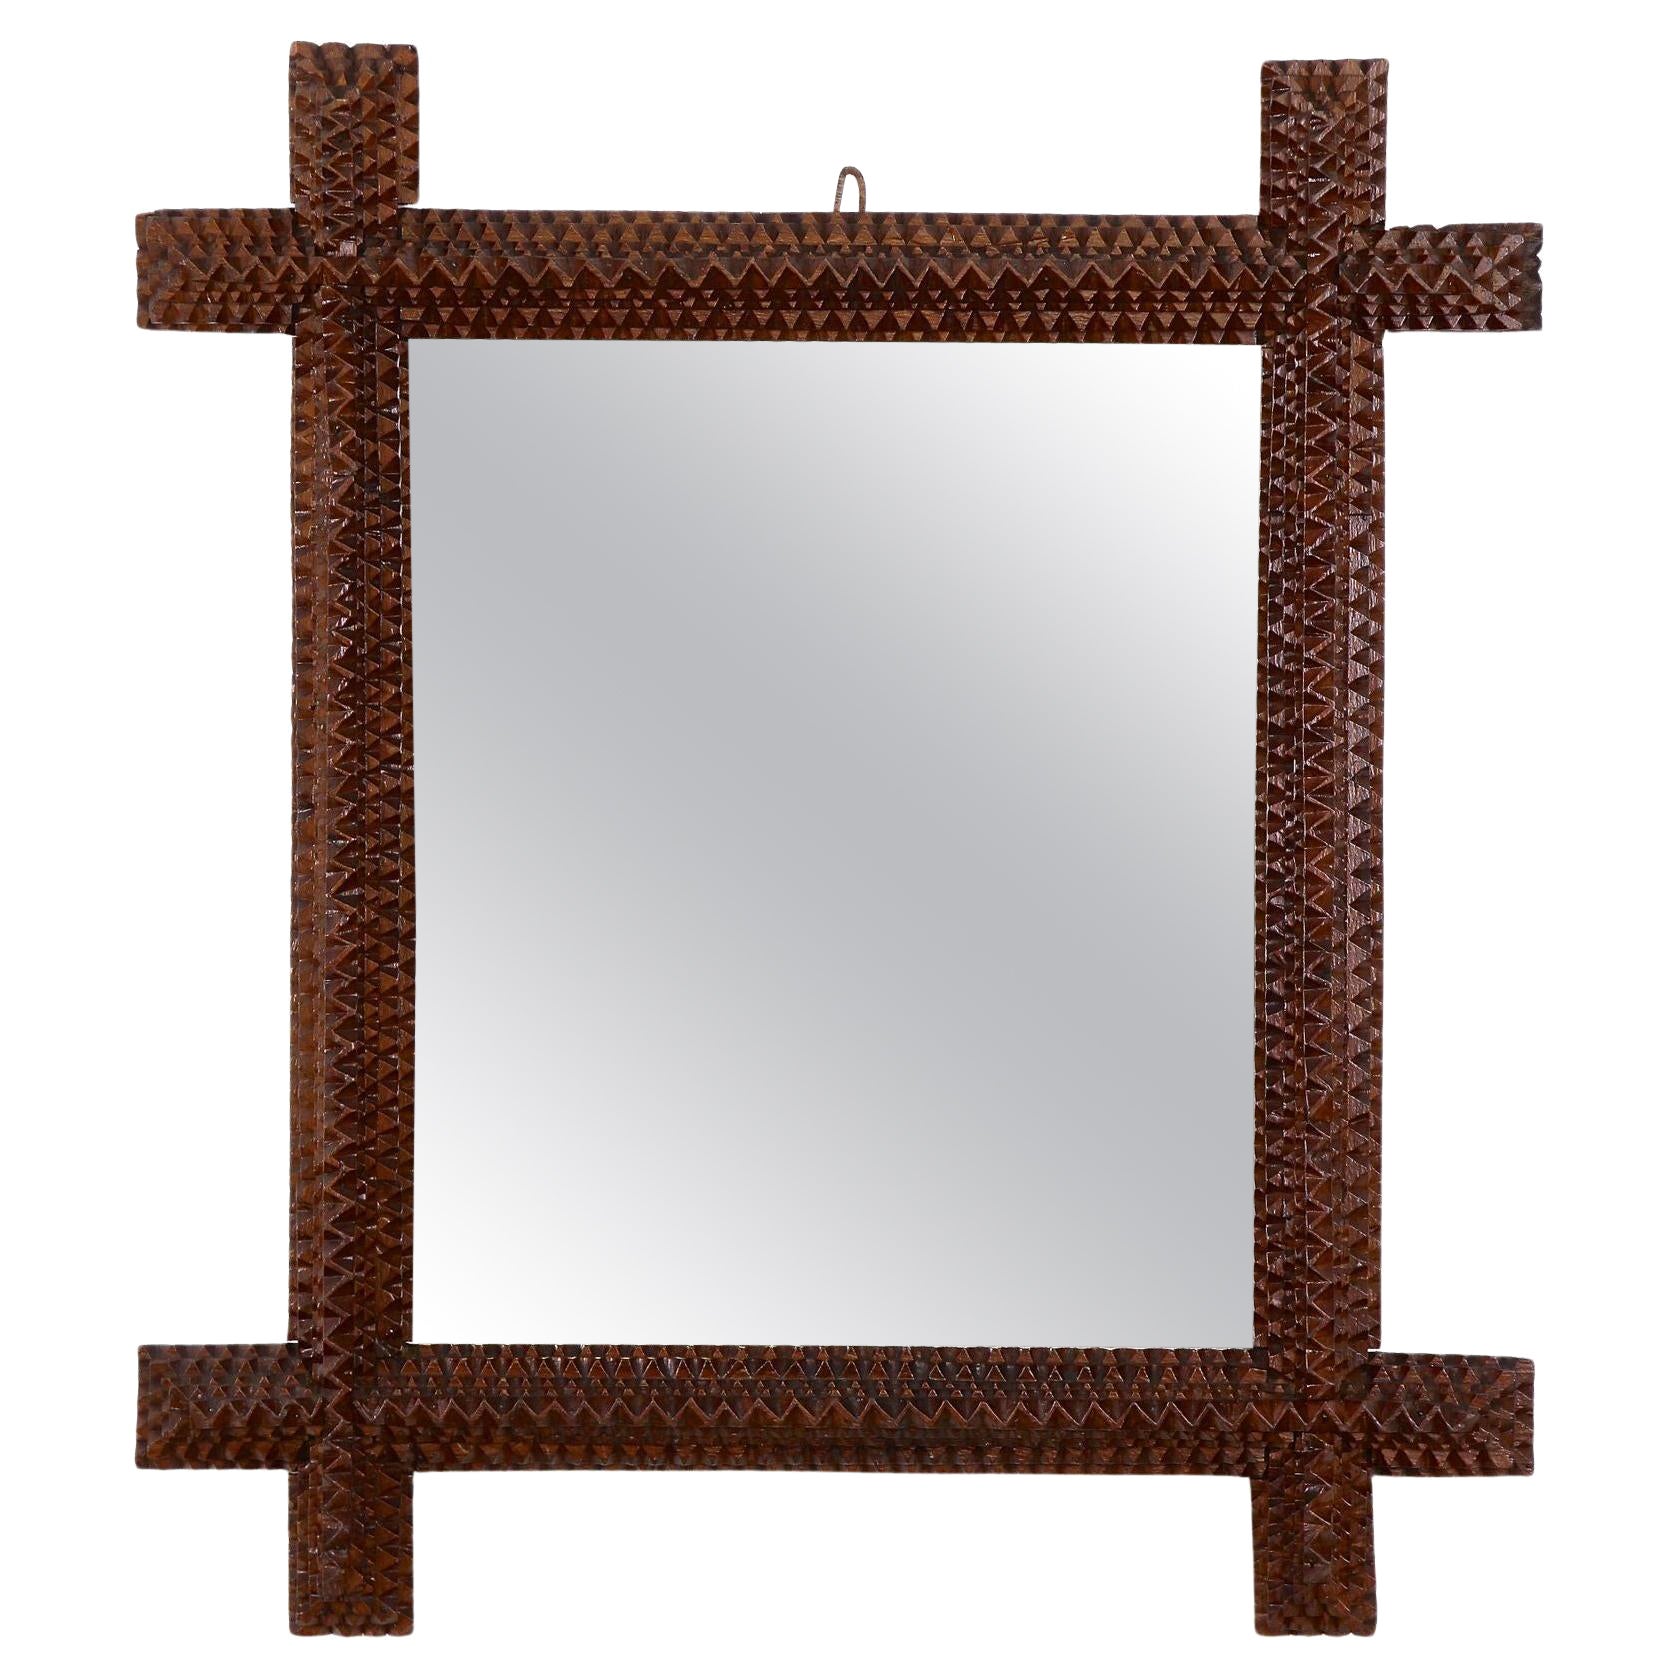 Rustic Tramp Art Wall Mirror with Chip Carvings, Austria circa 1880